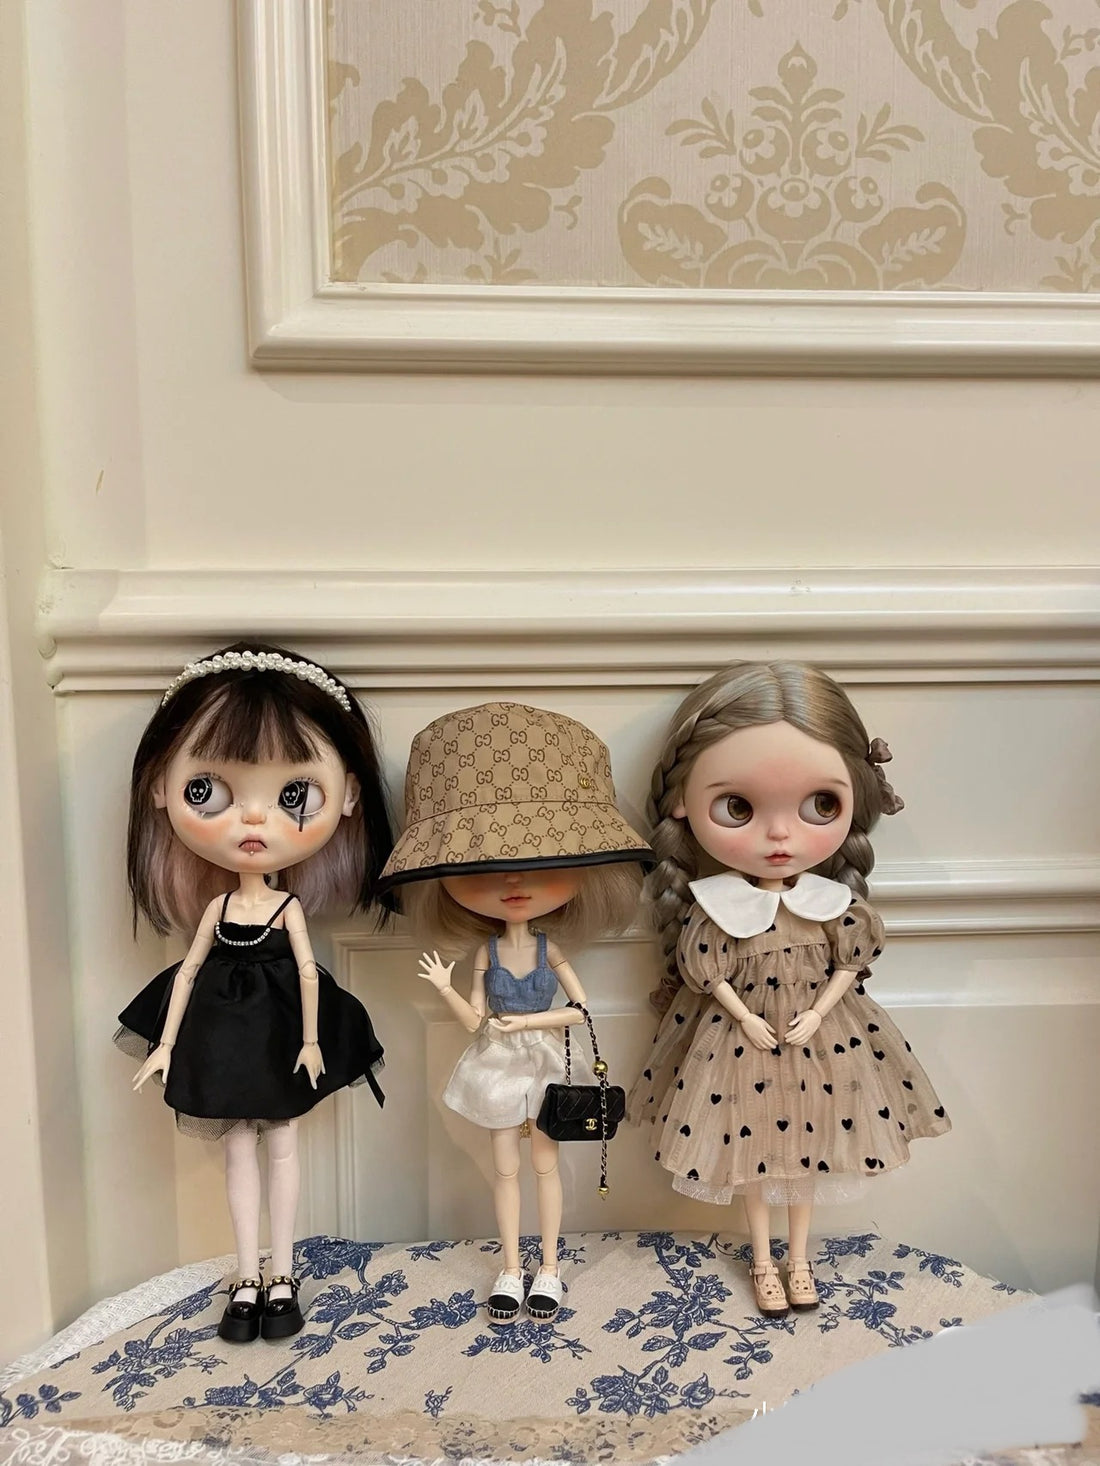 Adults fun collection：Blyth dolls